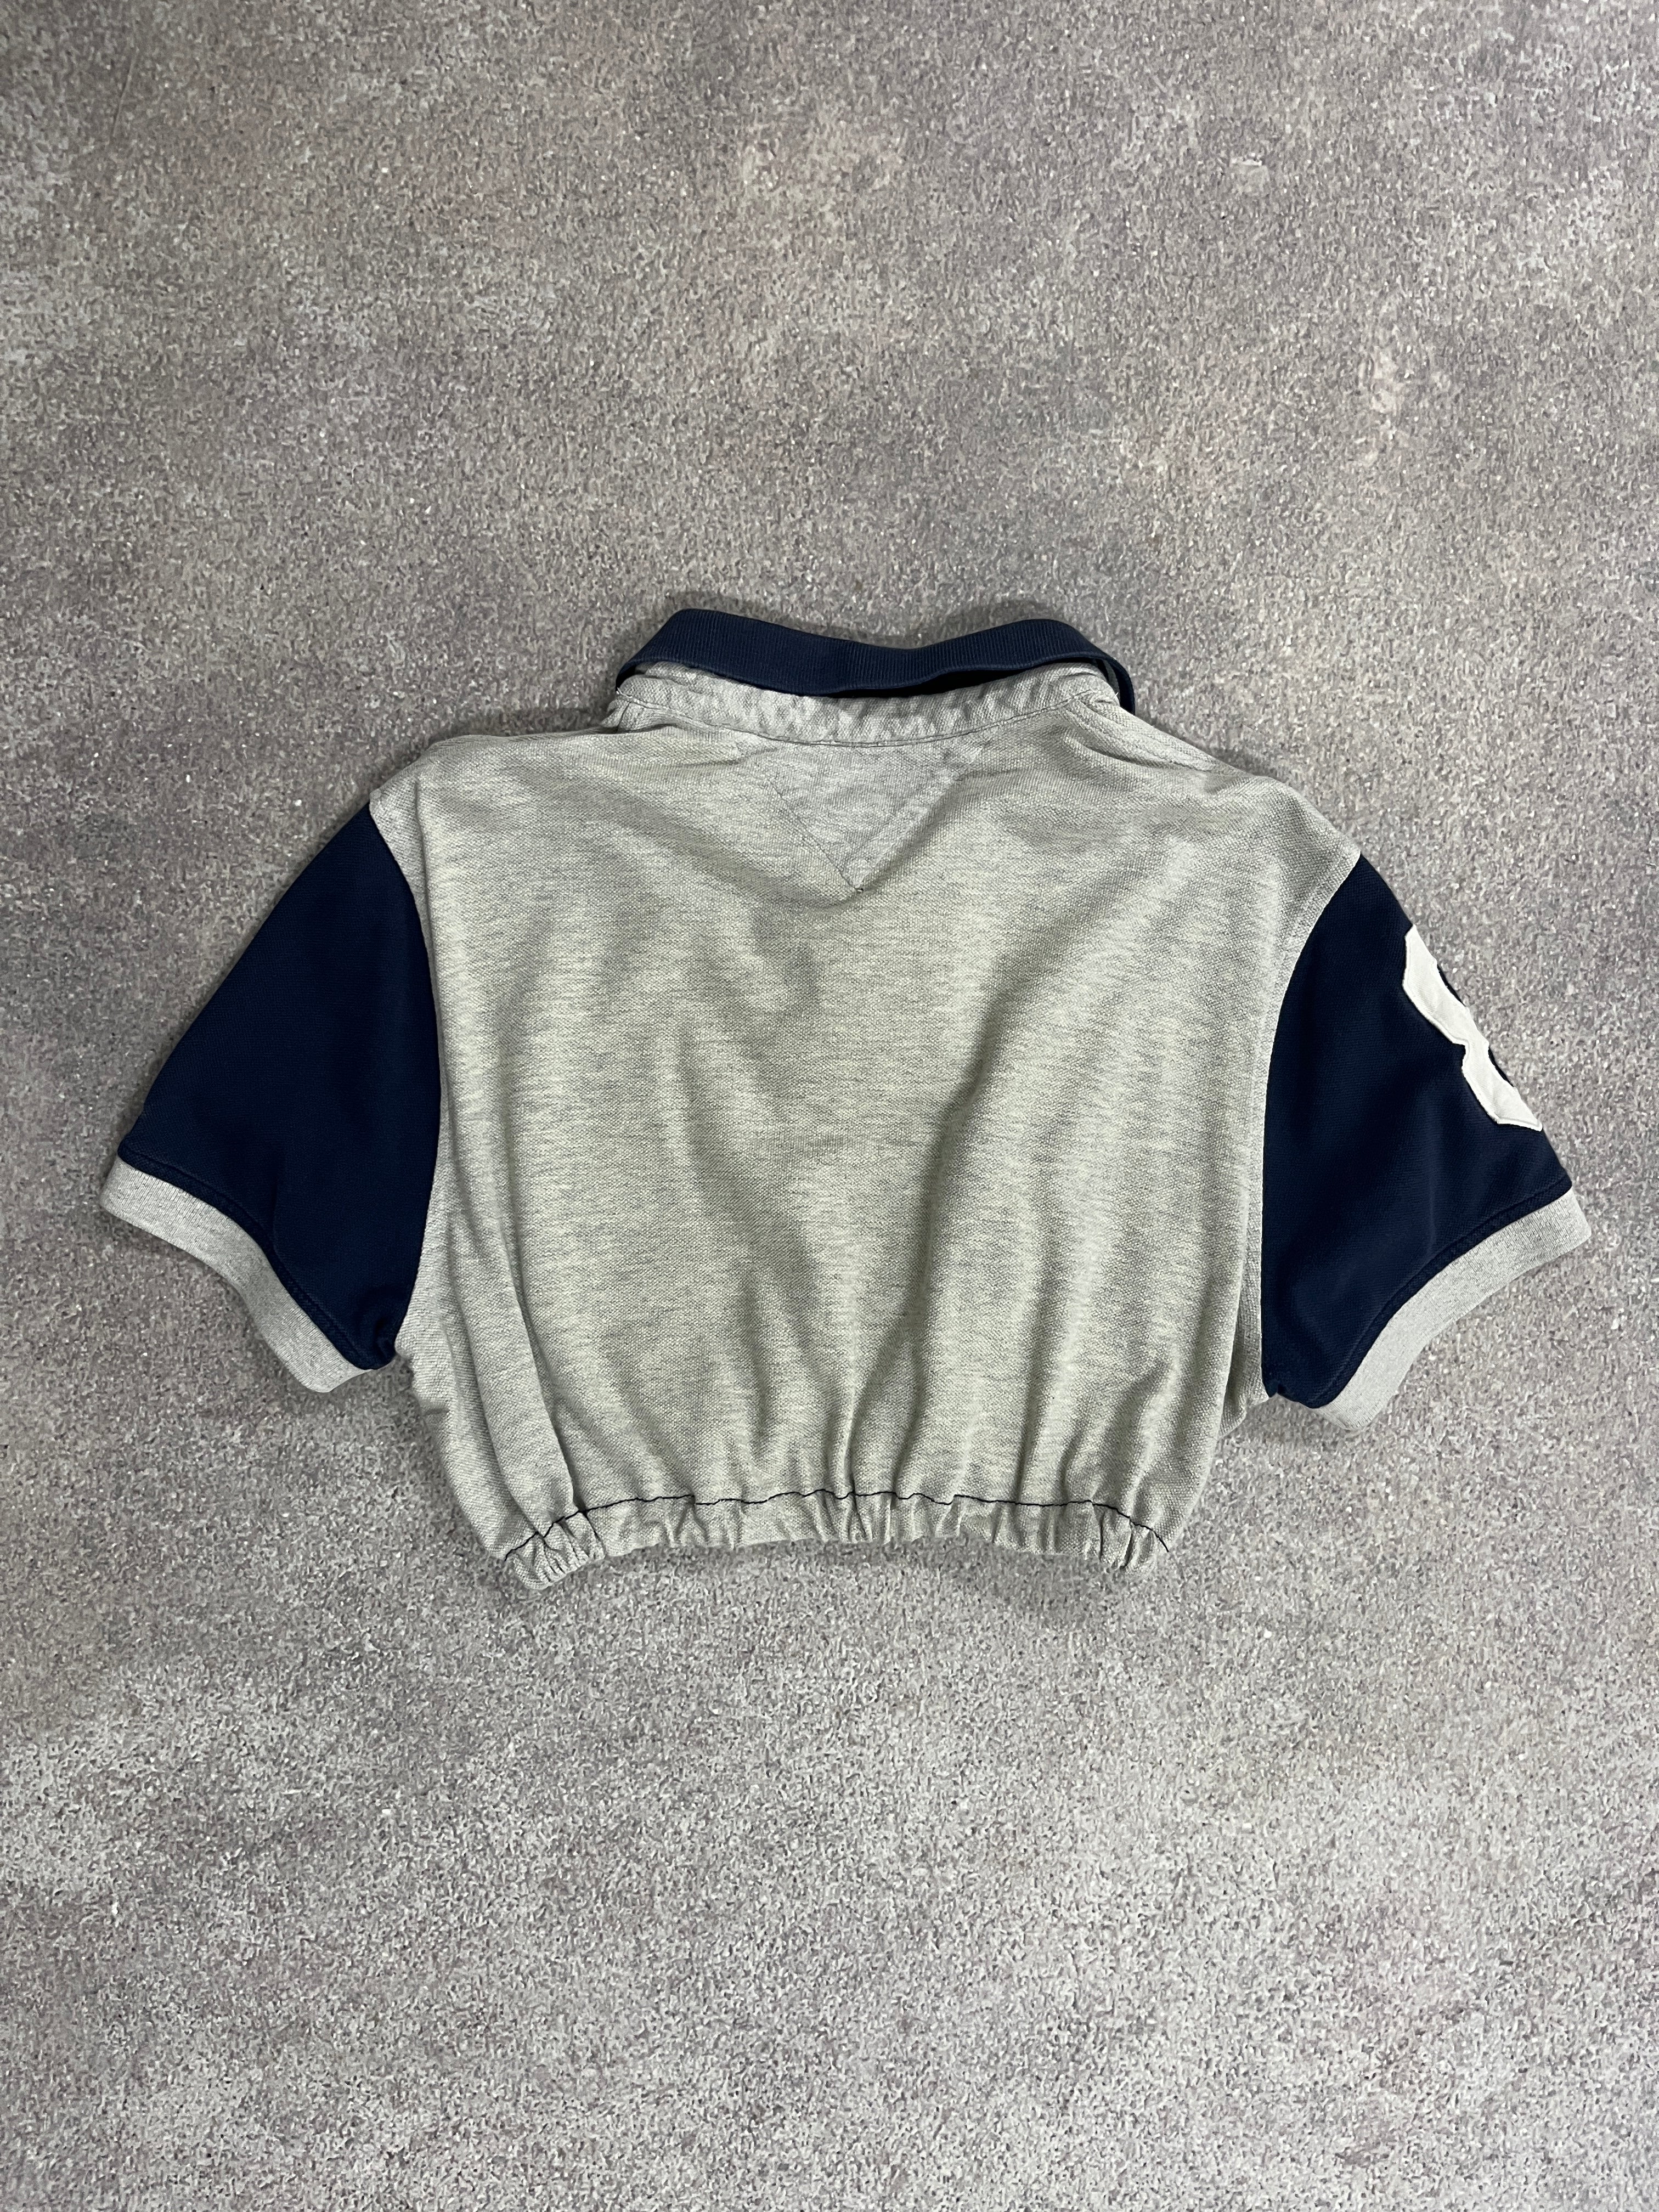 Vintage Tommy Hilfiger Cropped Top Grey // Small - RHAGHOUSE VINTAGE